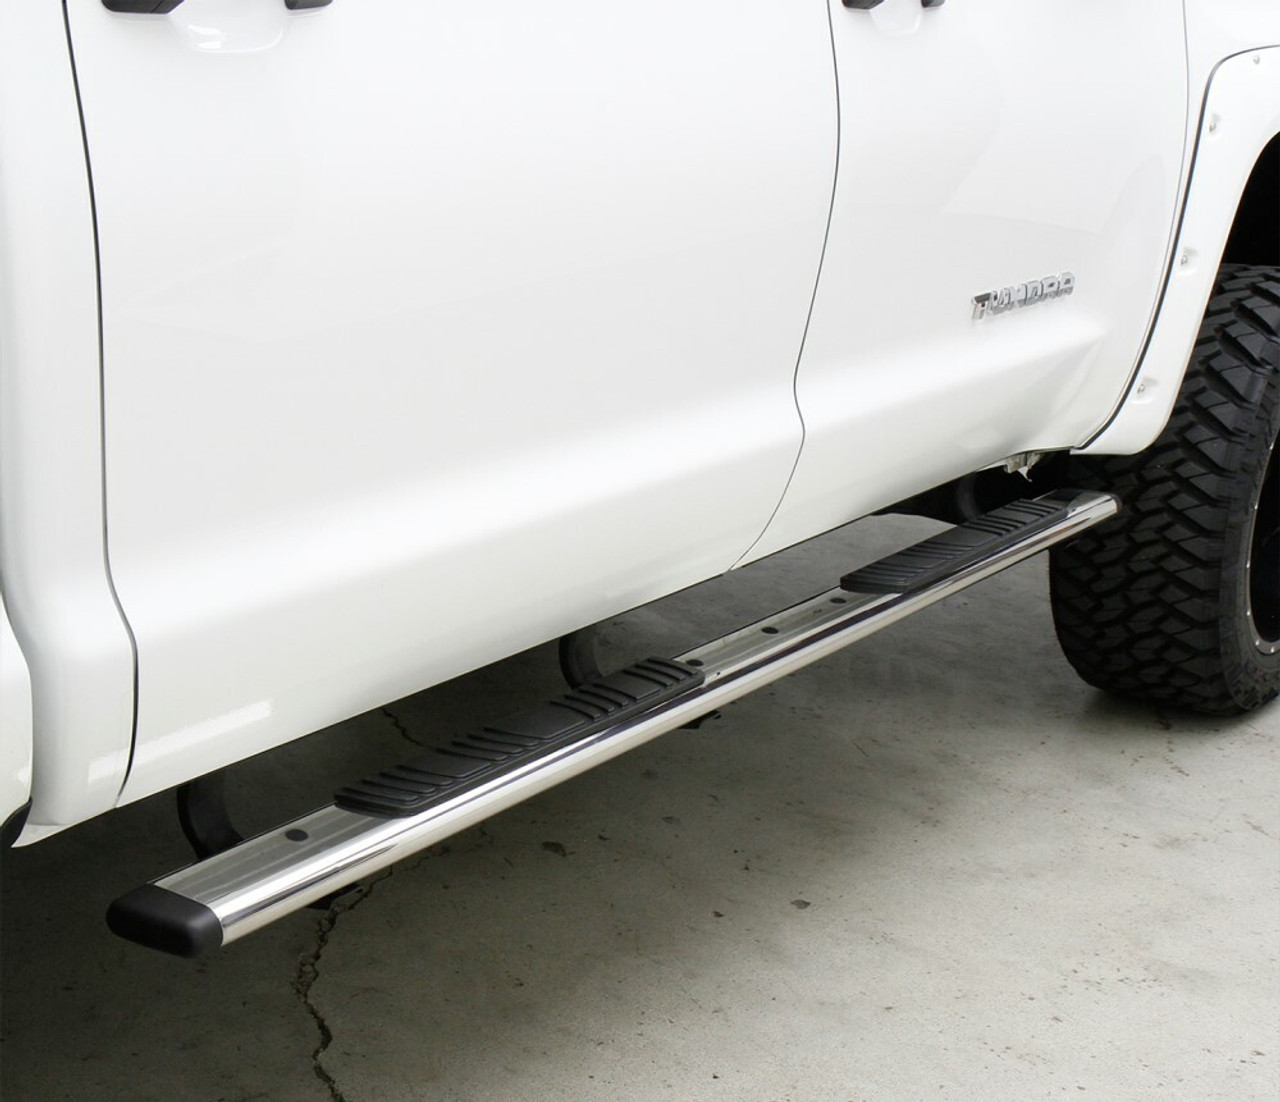 Go Rhino 685415587PS Ford, F-150 Raptor, 2017 - 2021, 5 inch OE Xtreme Low Profile - Complete Kit: Sidesteps + Brackets, Stainless steel, Polished, 650087PS side bars + 6841555 OE Xtreme Brackets. 5 inch wide x 87 inch long side bars